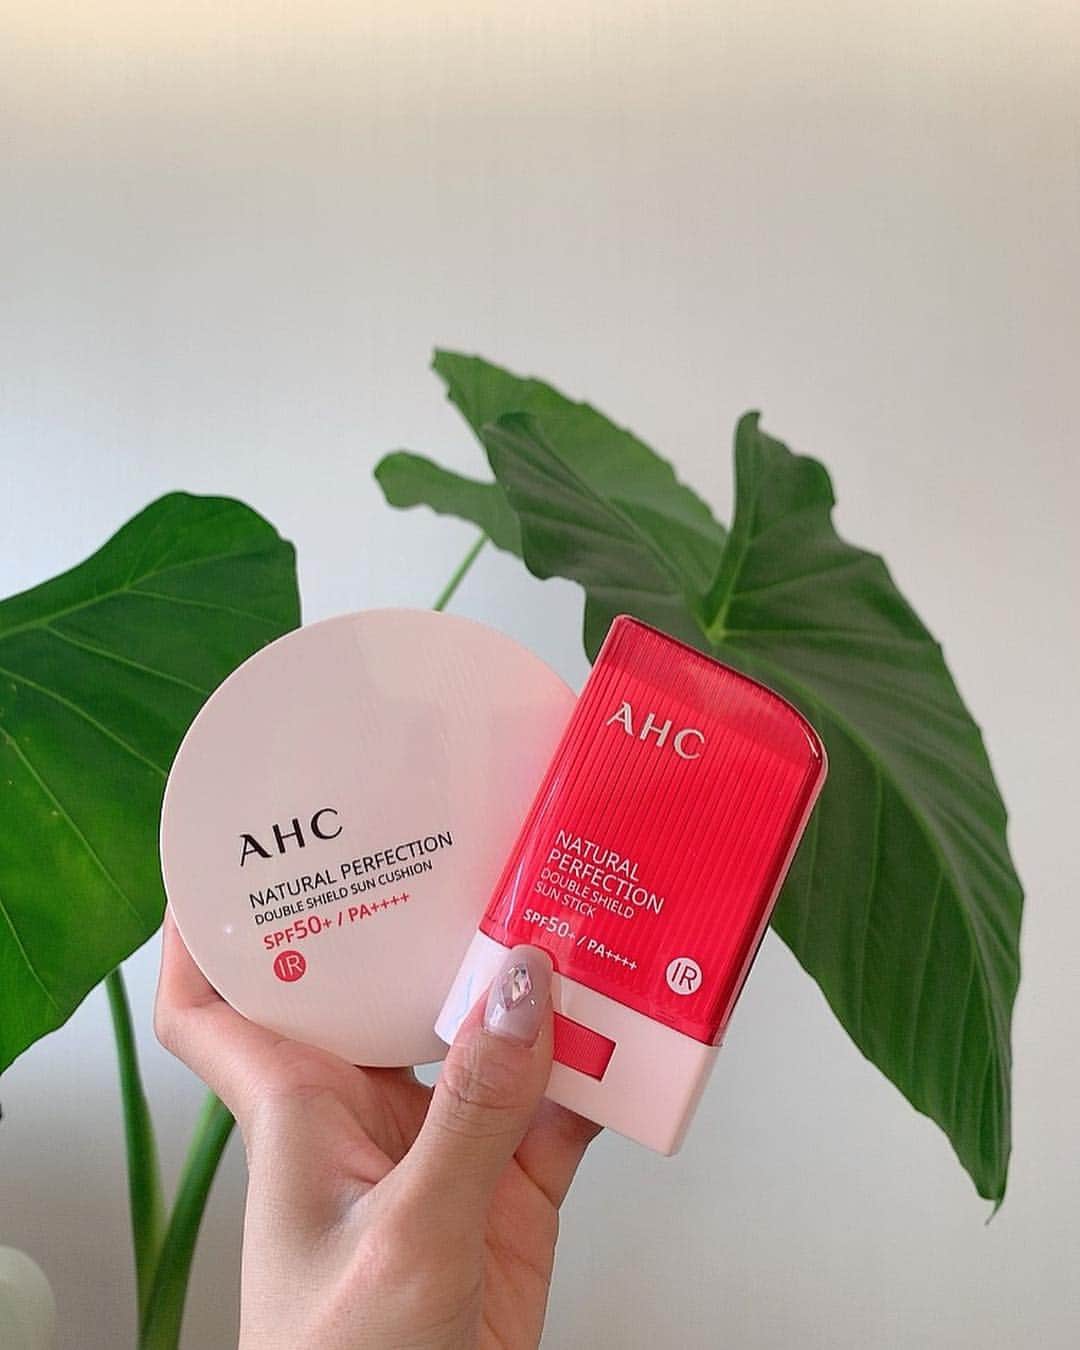 COCO さんのインスタグラム写真 - (COCO Instagram)「Skincare tip! @ahc.official  자외선뿐 아니라 근적외선까지 동시 차단되는 열광자차 AHC 선케어! 열과 빛을 동시에 차단해주고, 여러 번 덧발라도 들뜸 없이 밀착돼서 사용하기에도 편리해요.  이번 봄여름 MUST HAVE 아이템입니다! . Tried out the new #AHC suncare products! The new Natural Perfection Double Shield Sun Stick and Cushion are going to definitely save my skin from the strong sun this coming spring and summer! Bring it on! . . #AHC #에이에이치씨 #AHC선스틱 #AHC선쿠션 #열광자차 #열광스틱 #열광쿠션 #2개의태양 #열광동시차단 #내추럴퍼펙션더블쉴드선스틱 #내추럴퍼펙션더블쉴드선쿠션 #sponsored #AD」3月28日 18時10分 - rilaccoco